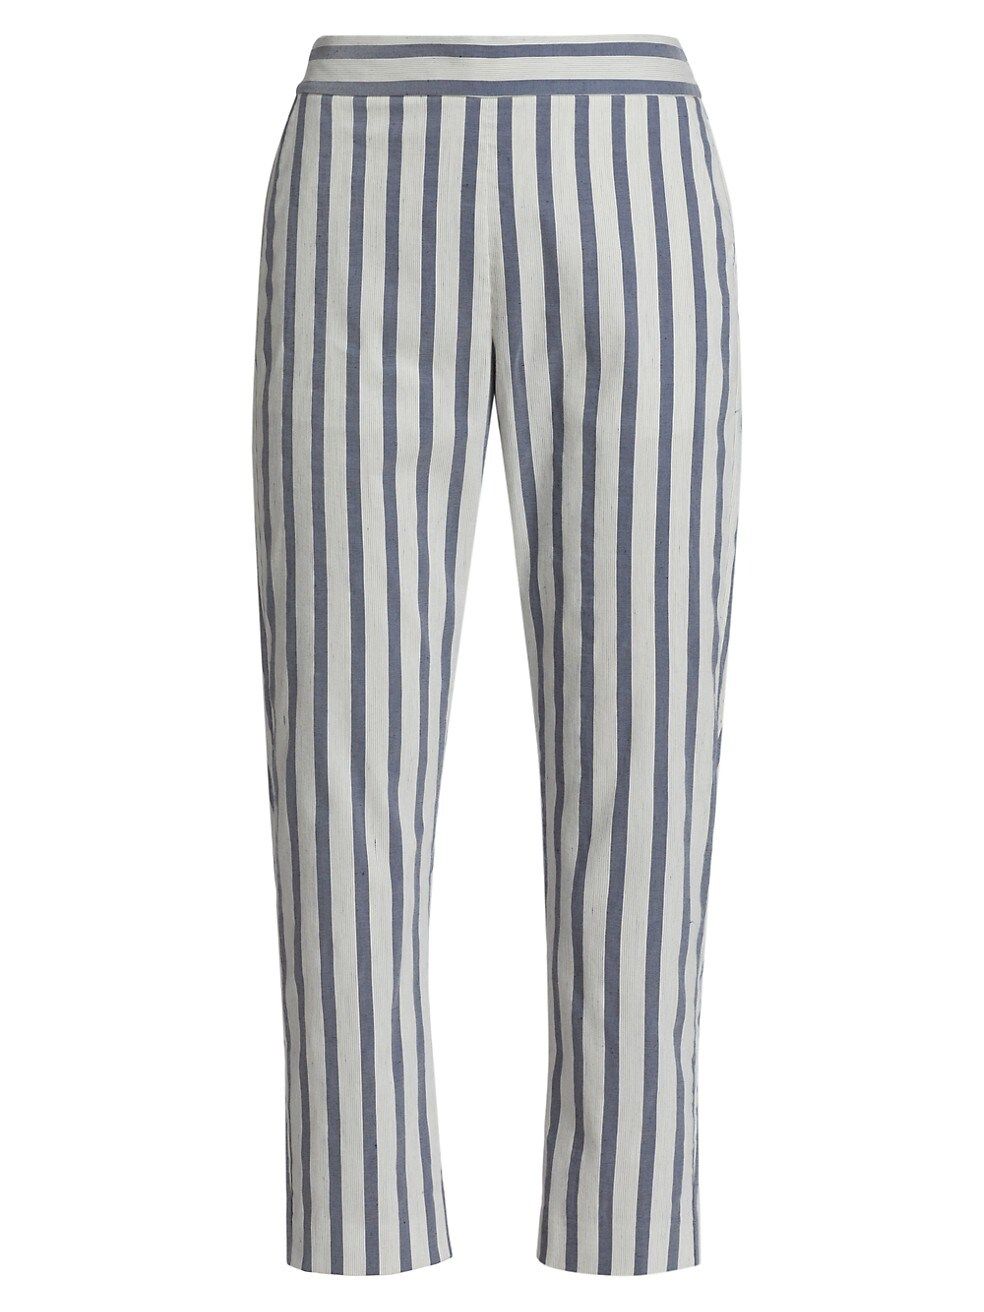 Striped Hilary Trousers | Saks Fifth Avenue